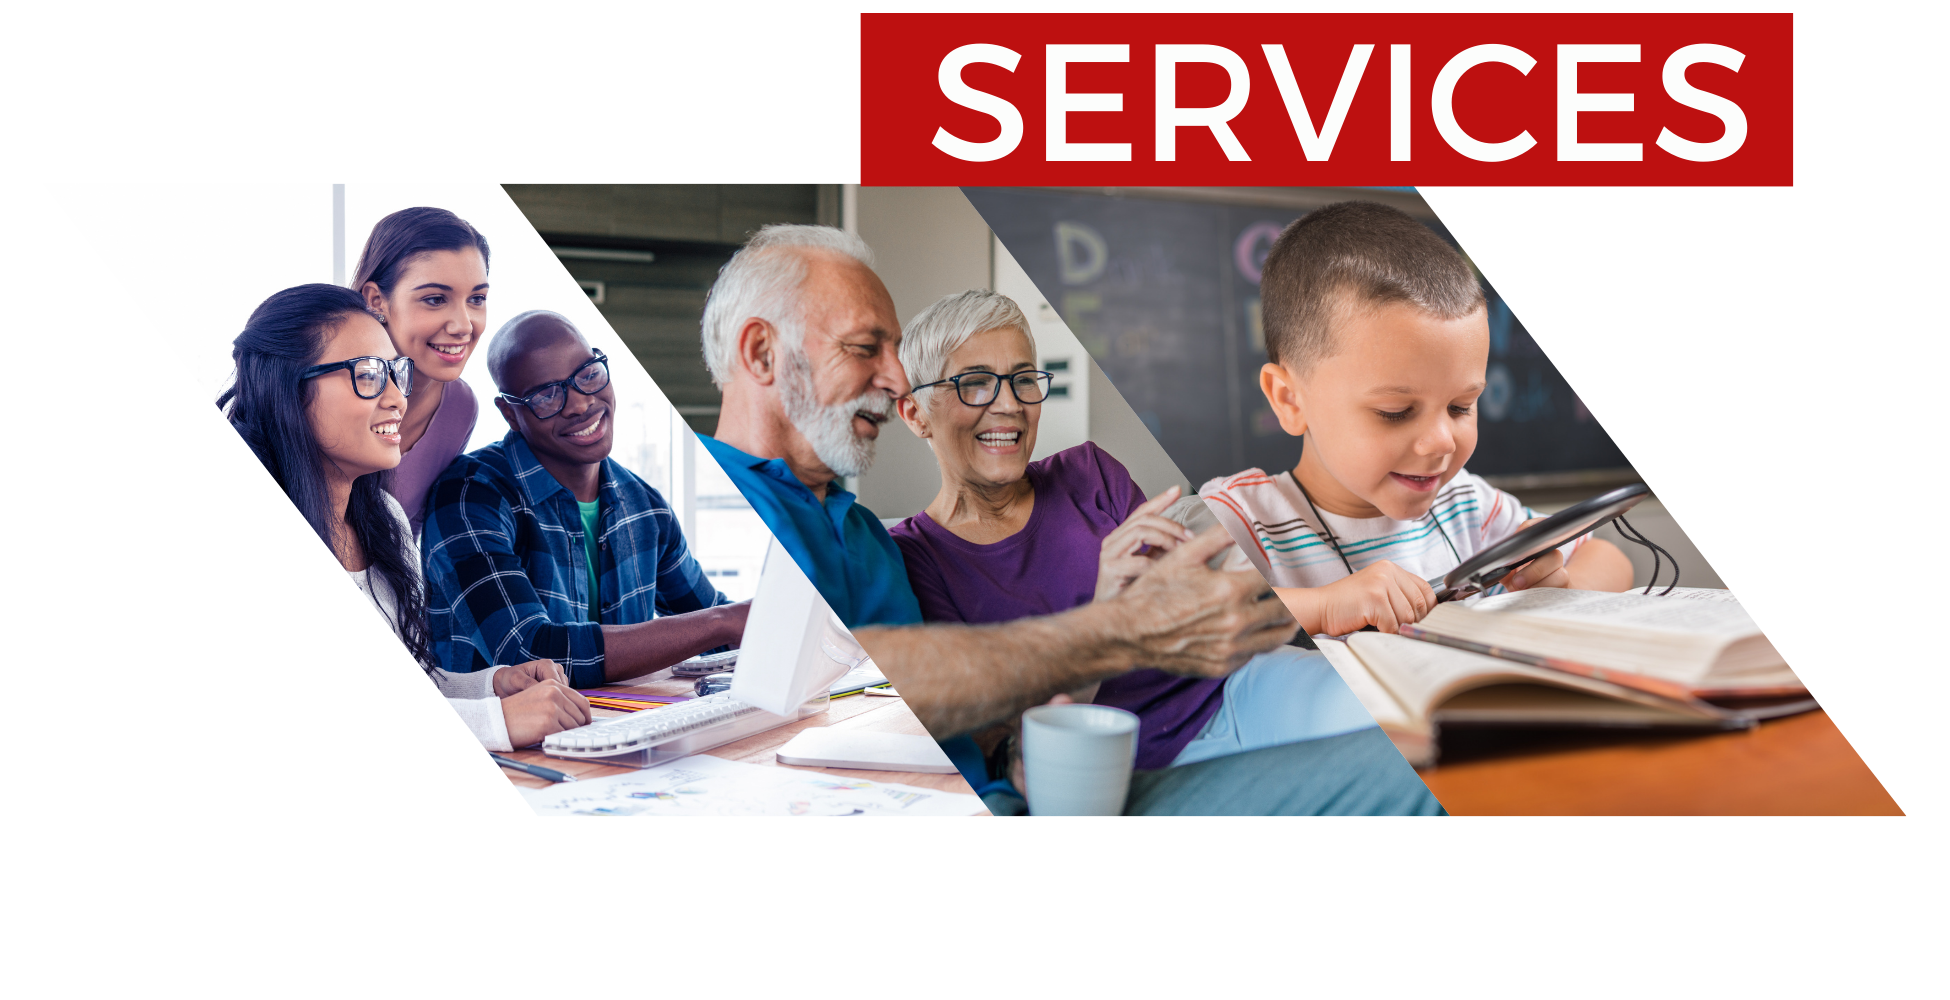 Services for all ages.